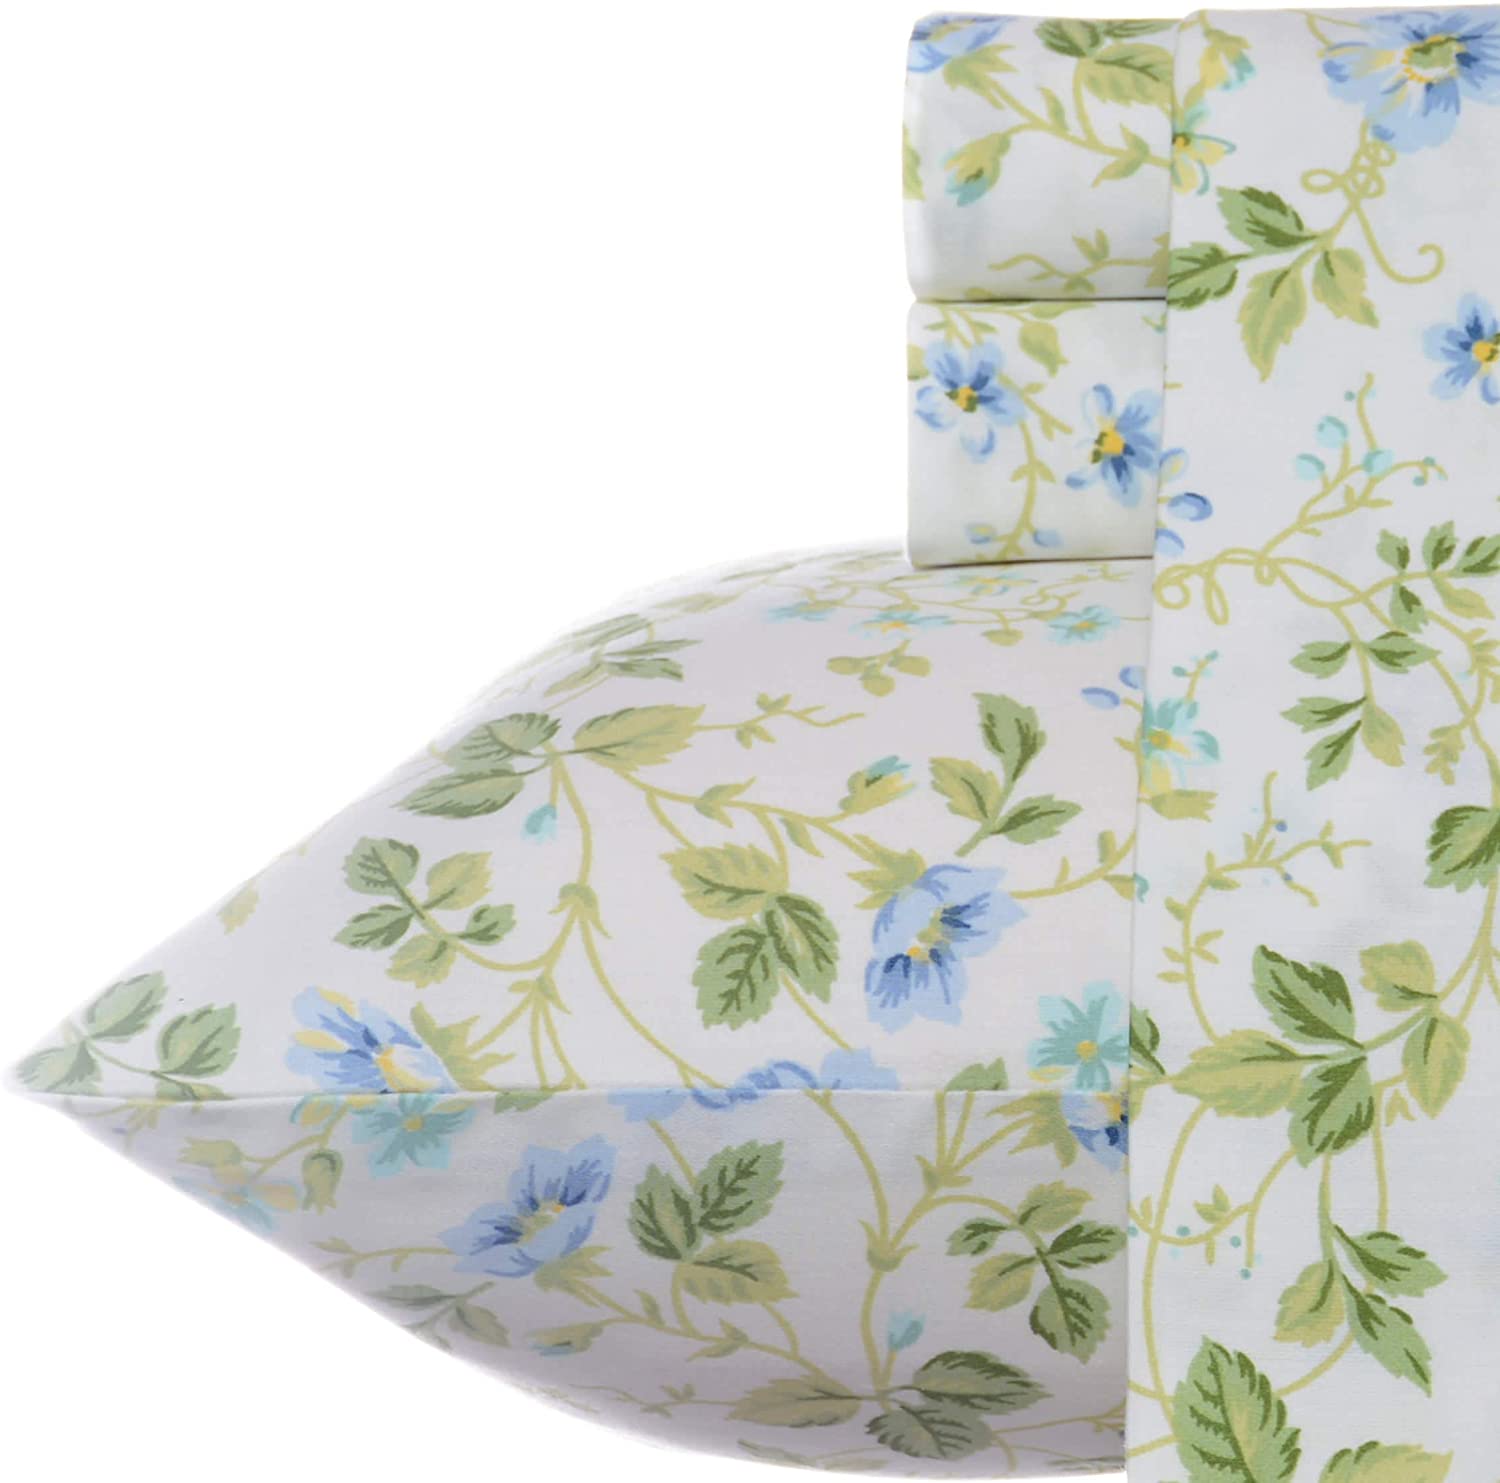 Laura Ashley Home Sateen Collection Bed Sheet Set - 100% Cotton 